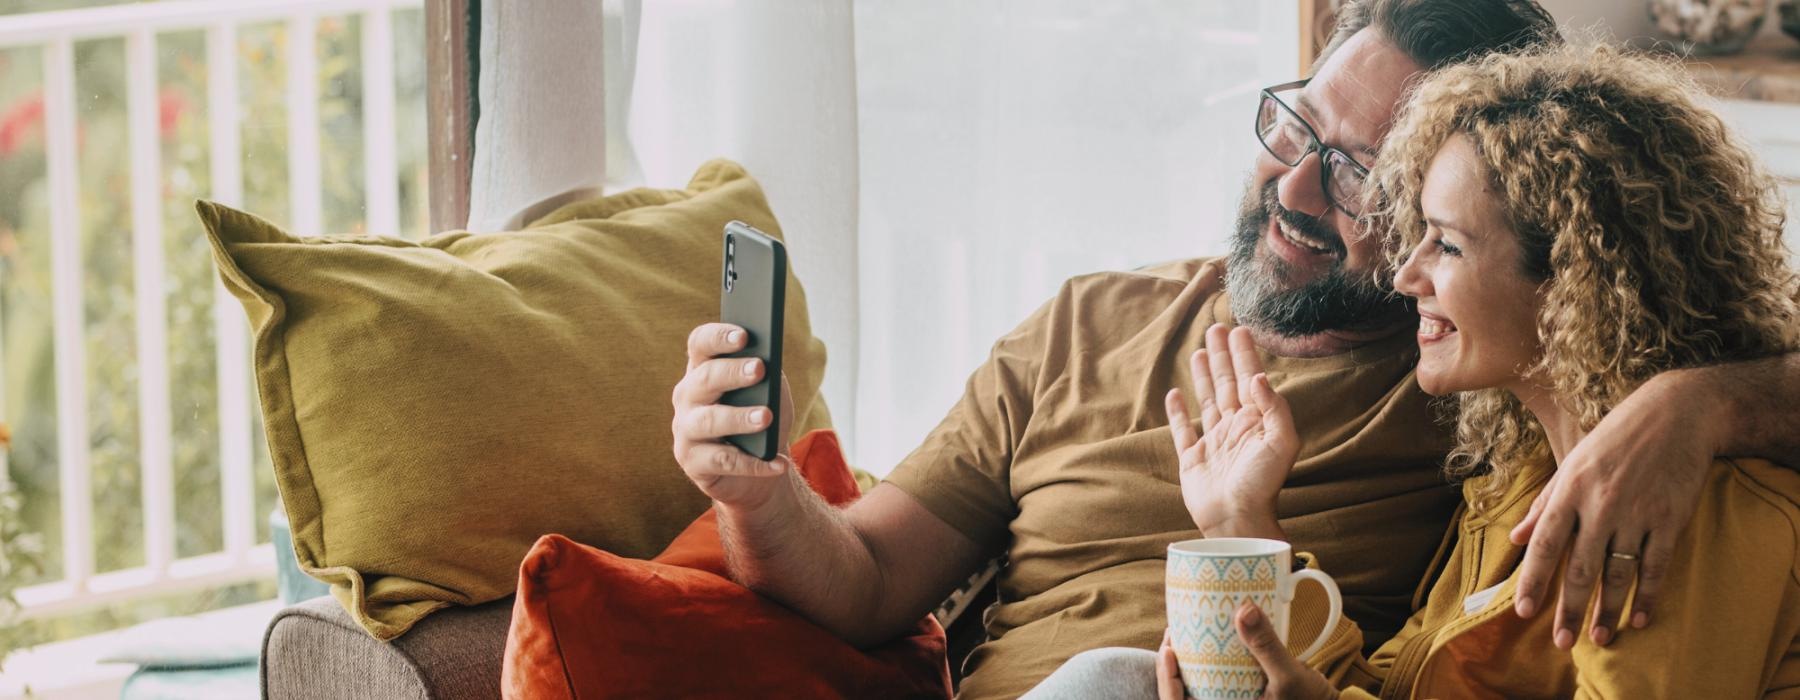 Lifestyle photo of a man and woman sitting on a couch FaceTiming